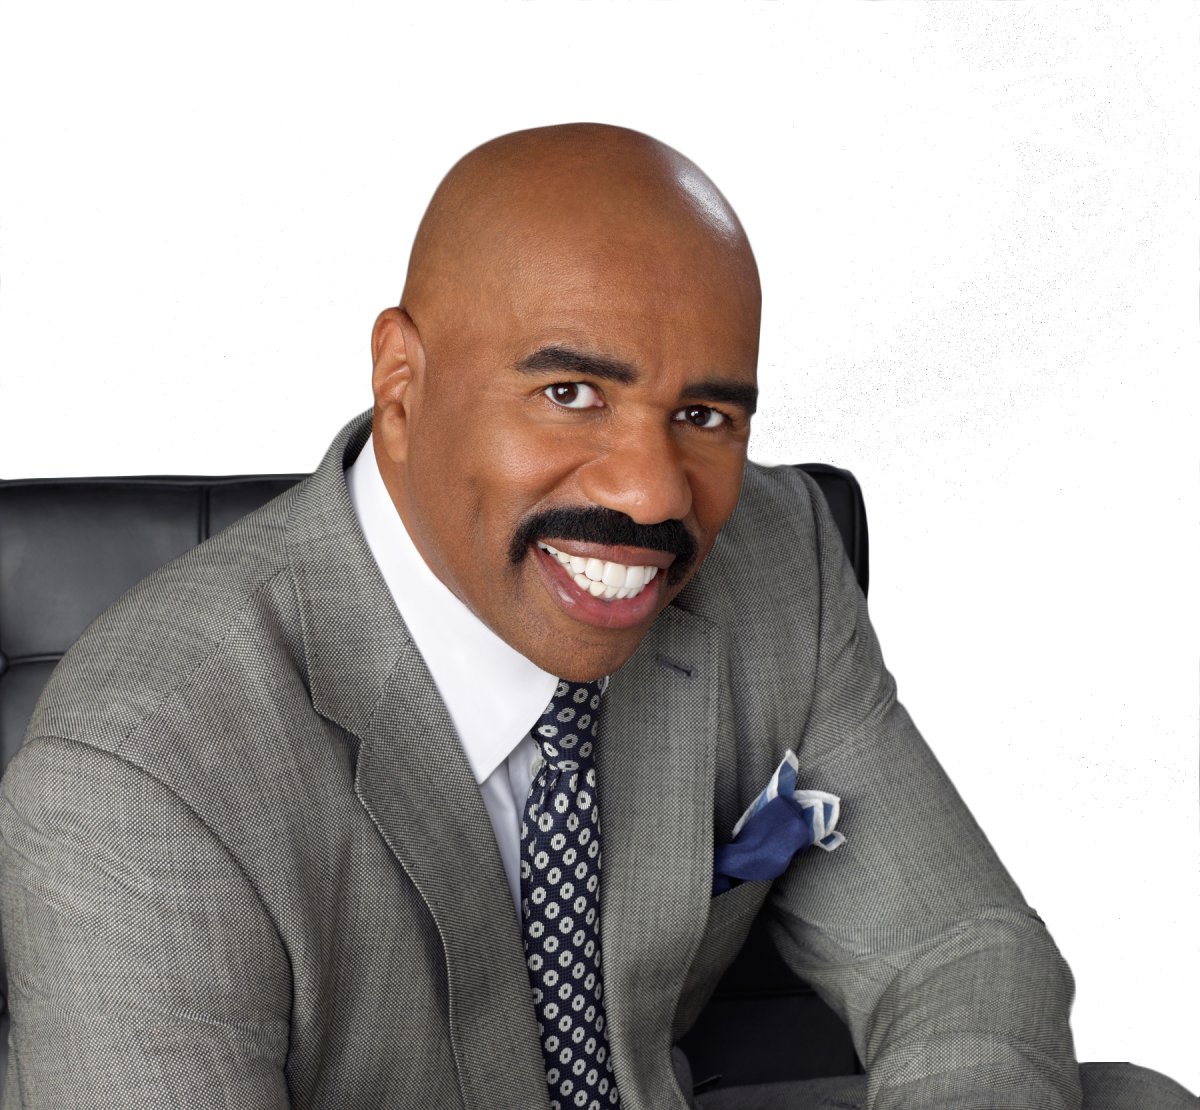 “You Sit Behind Your Computer Like You Really All That”–Steve Harvey (@IAmSteveHarvey) To Critics on Black Twitter!